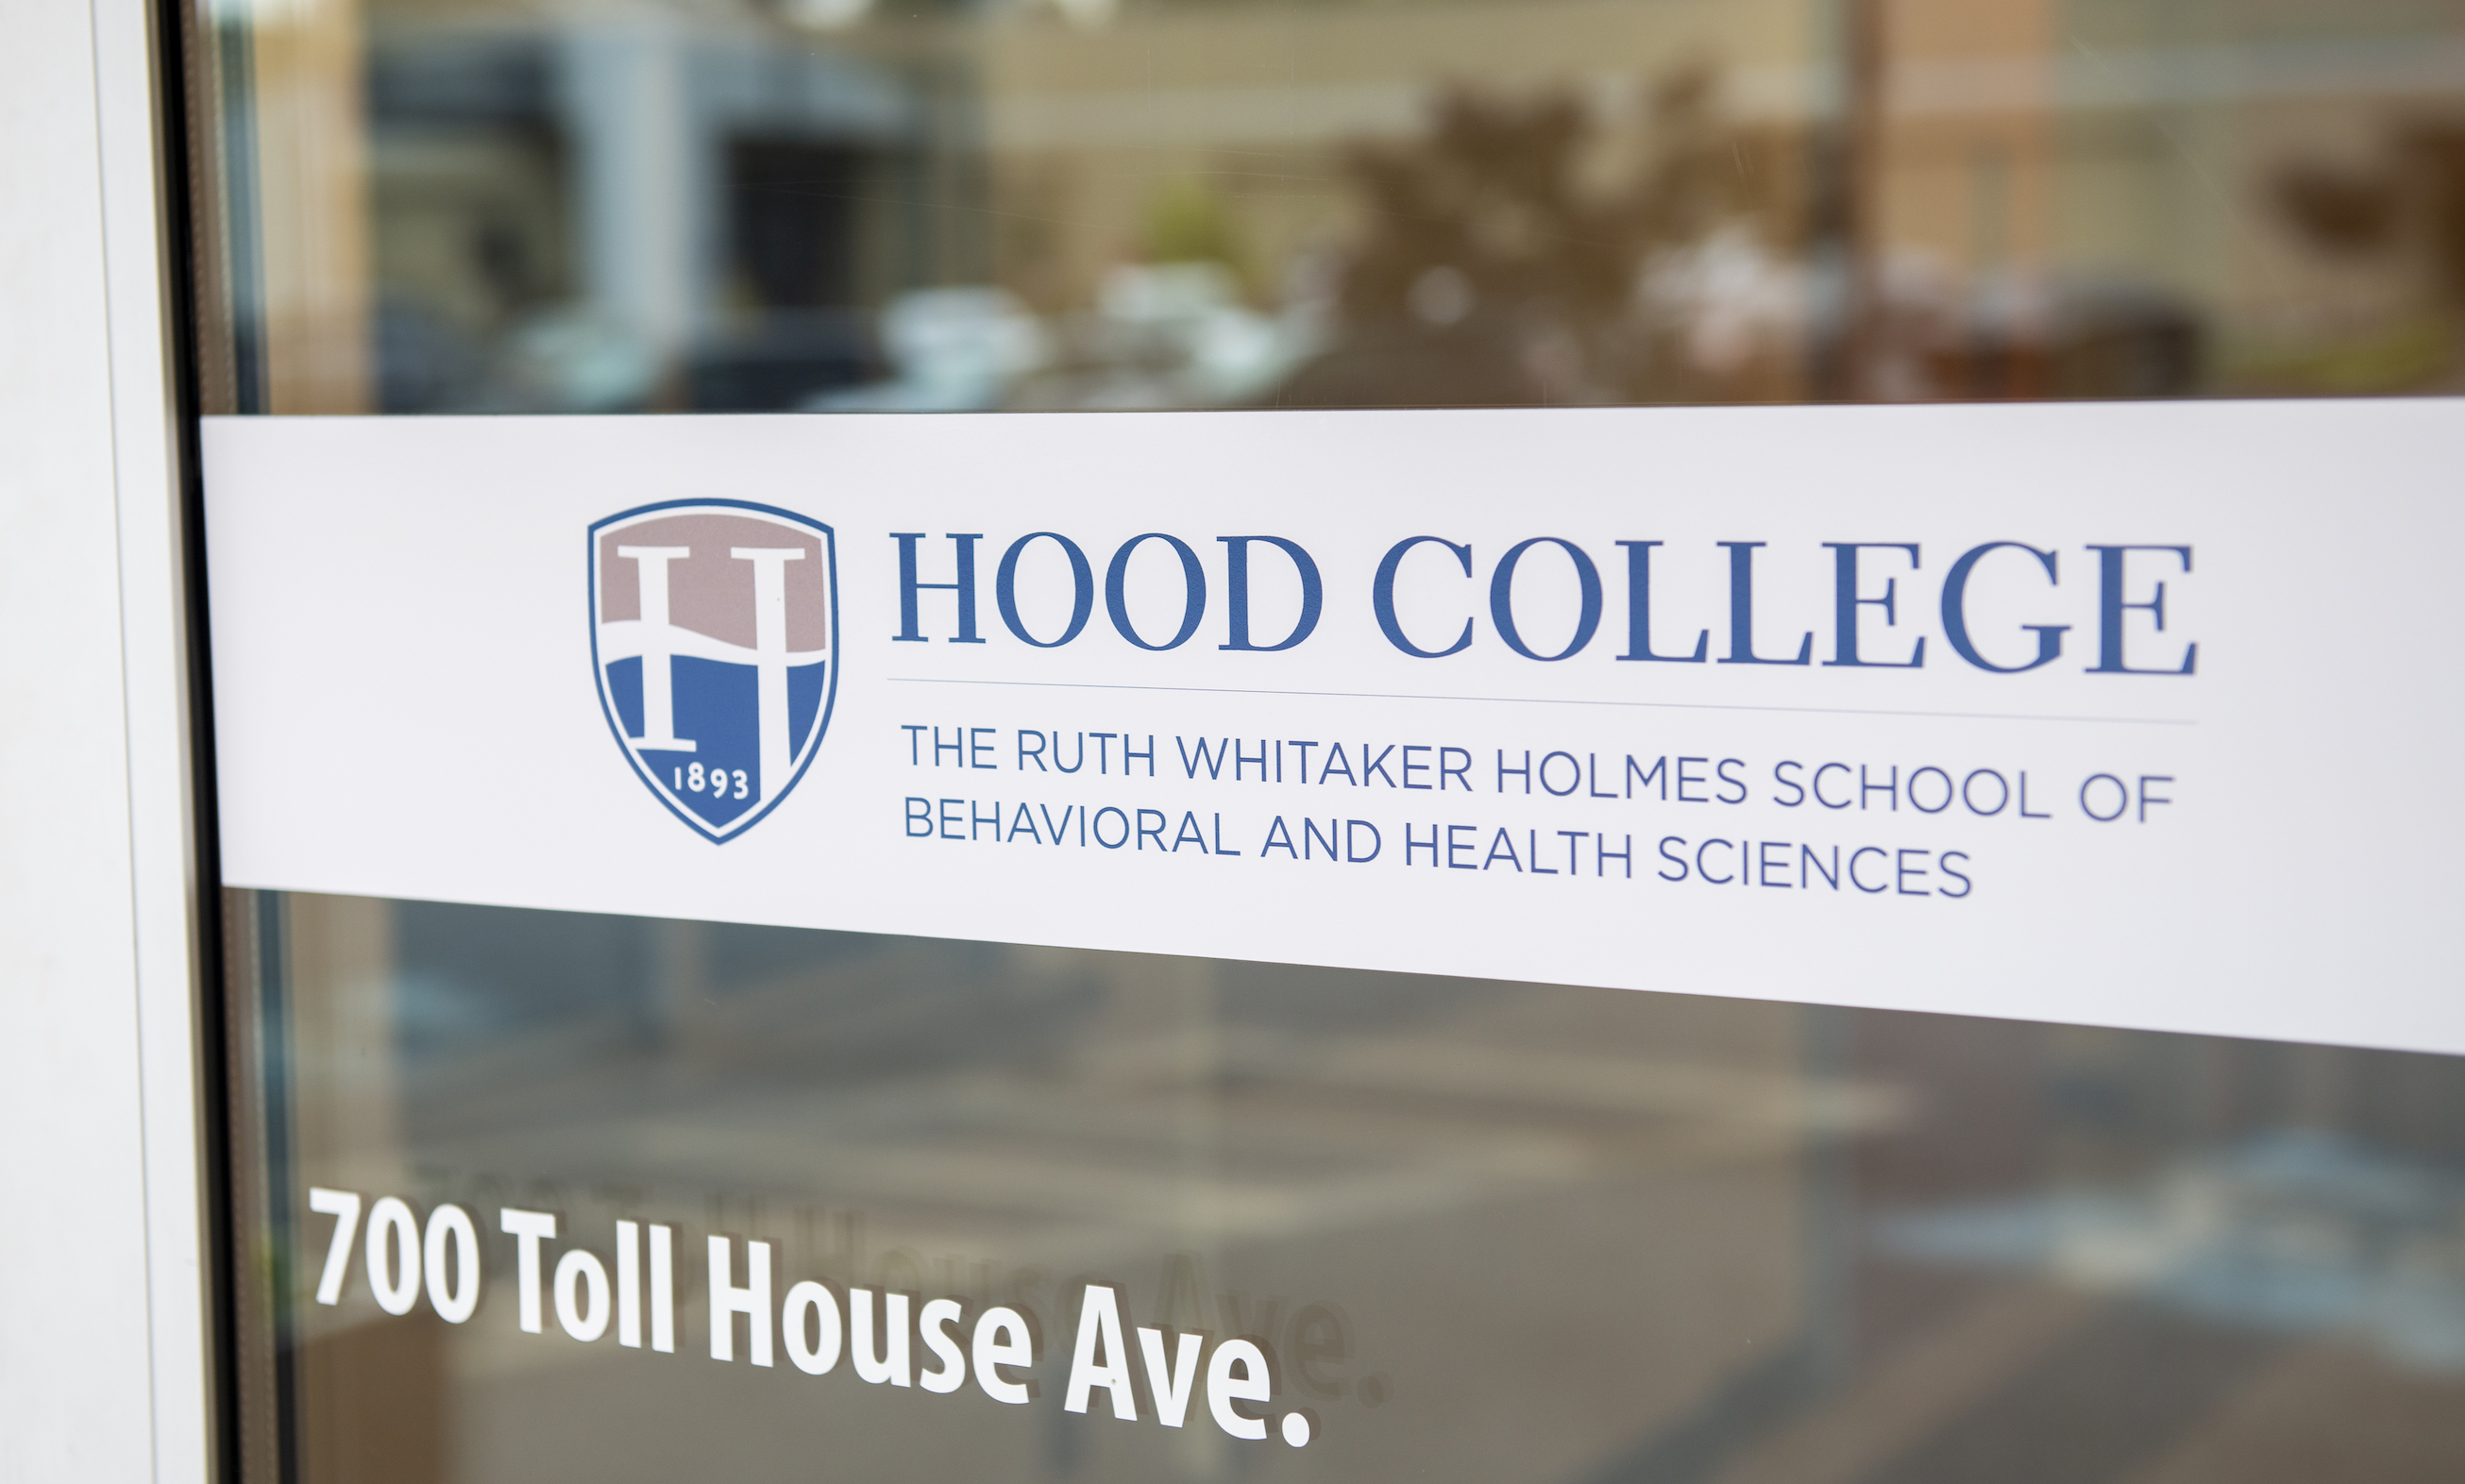 The entrance to the Ruth Withaker Holmes School of Behavioral and Health Sciences, home of the Hood College Department of Nursing